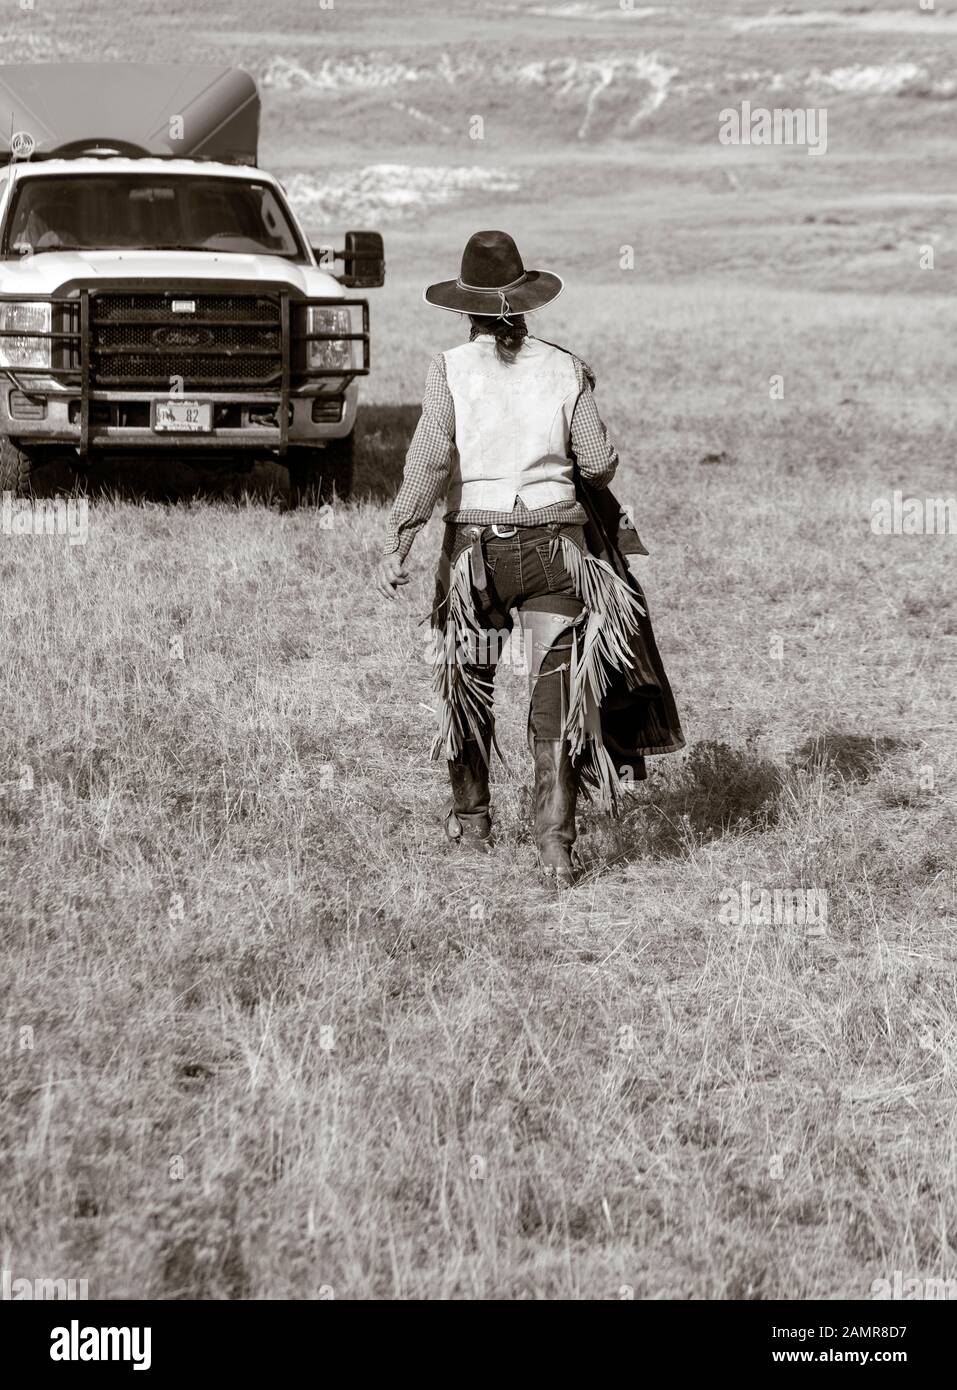 WY04072-00-BW...WYOMING - Woman ranch hand on the Willow Crek Ranch. Stock Photo